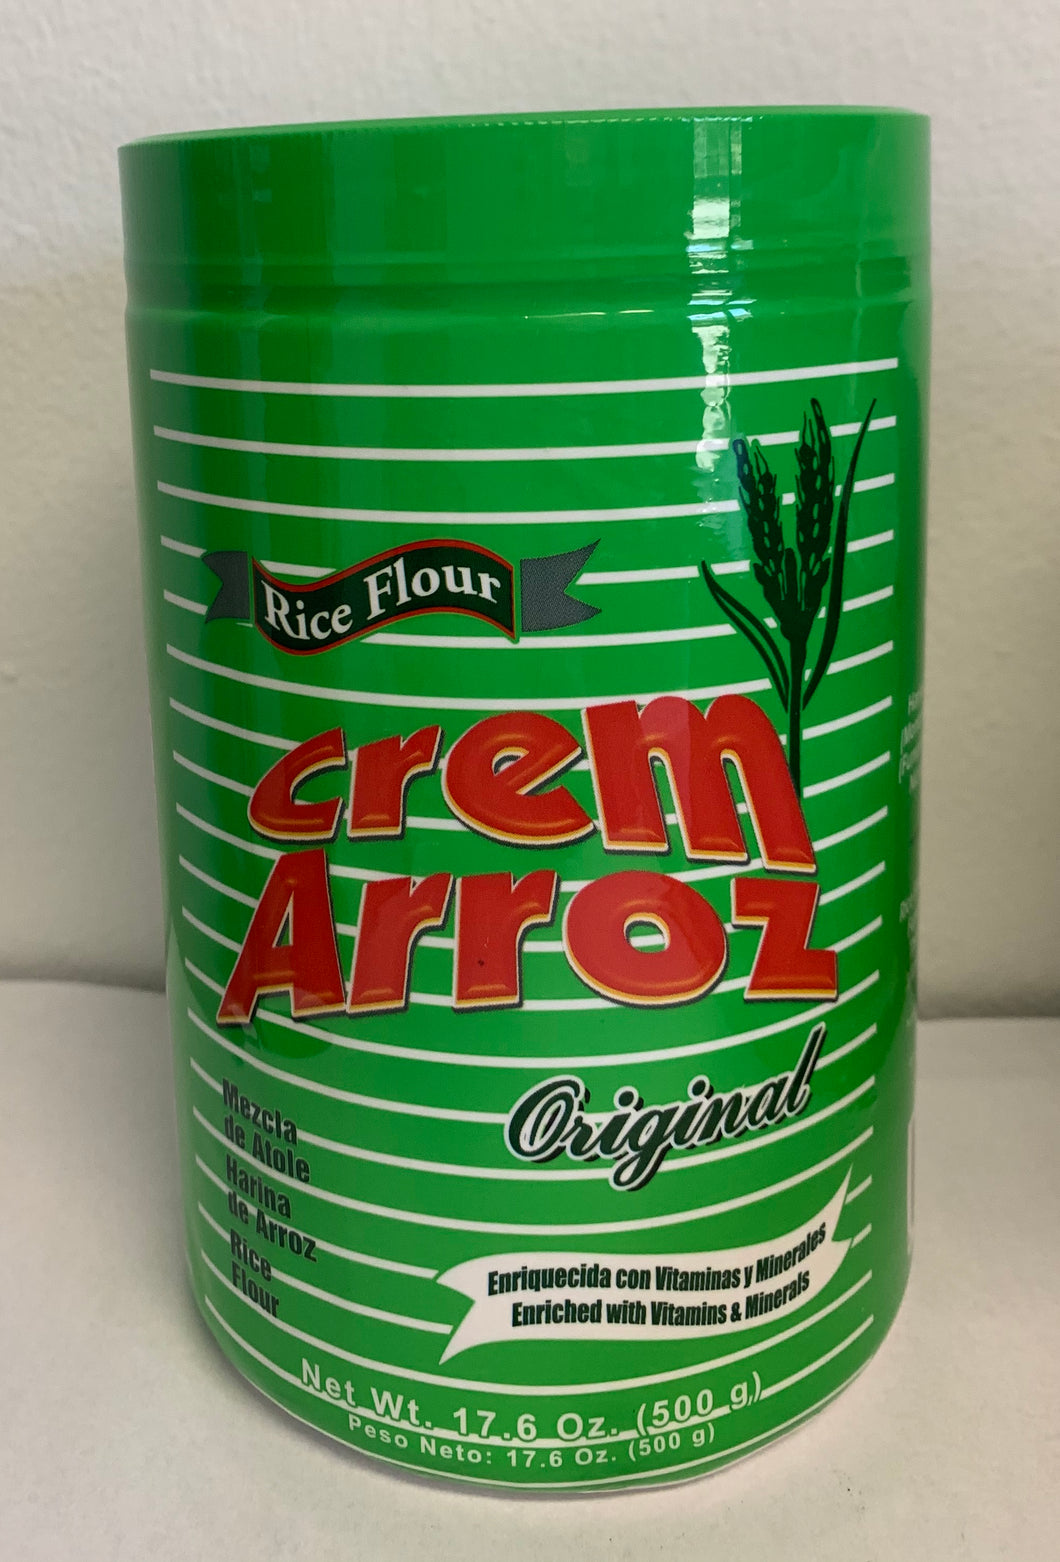 Find Mary Crema de Arroz (Rice Flour) - 15.8 oz / 450 g Mary X for sale at  very cheap costs